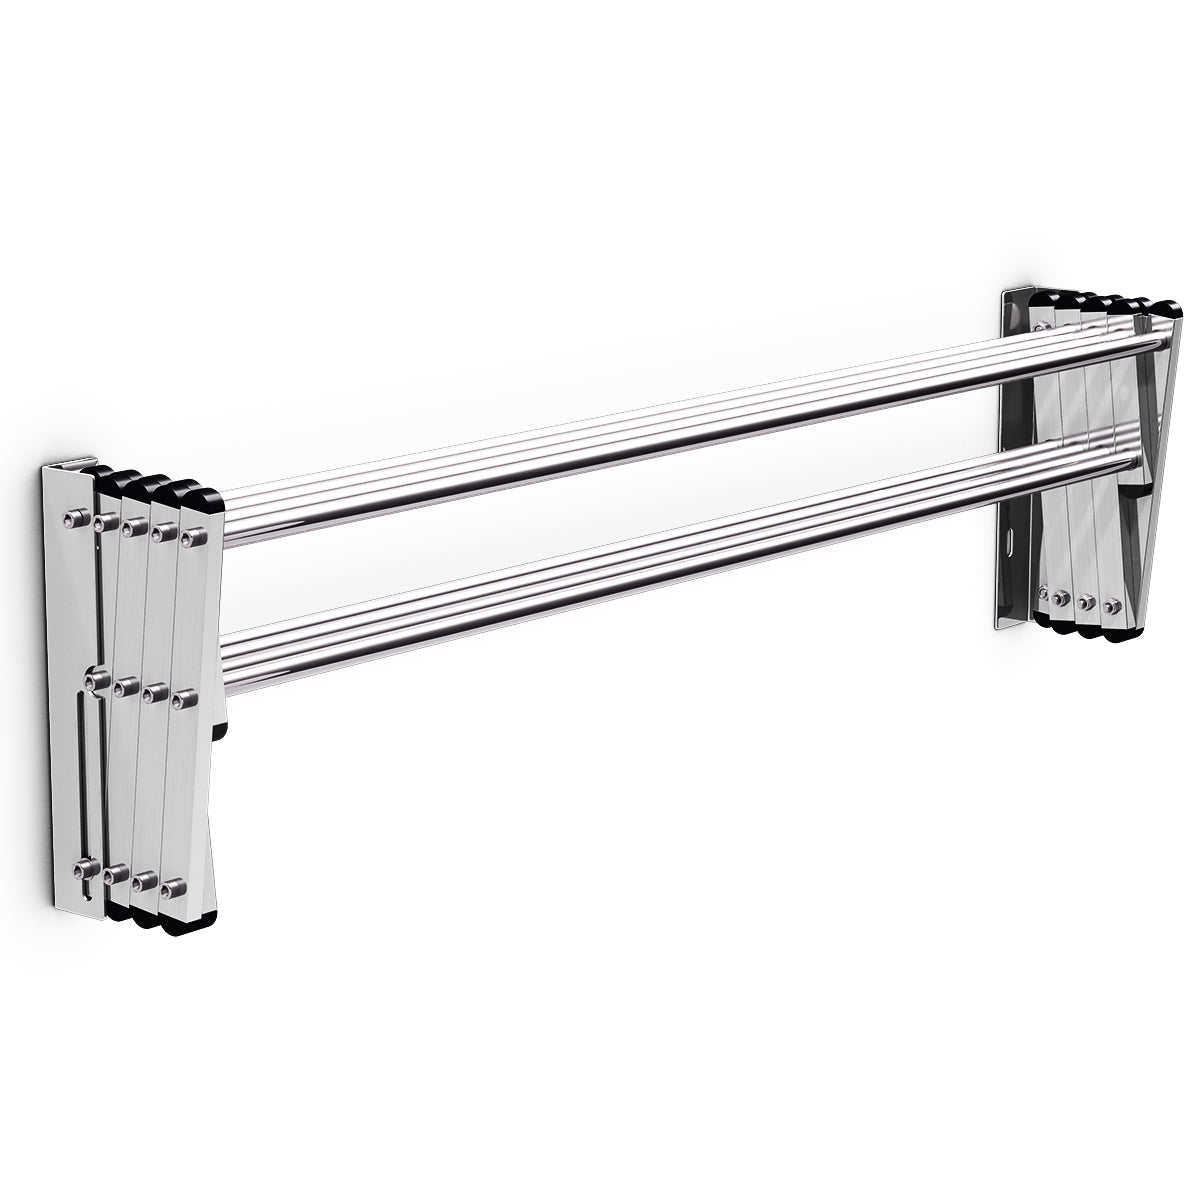 Space-saving Accordion Expandable Towel Rack with 8 Rods Large Capacity